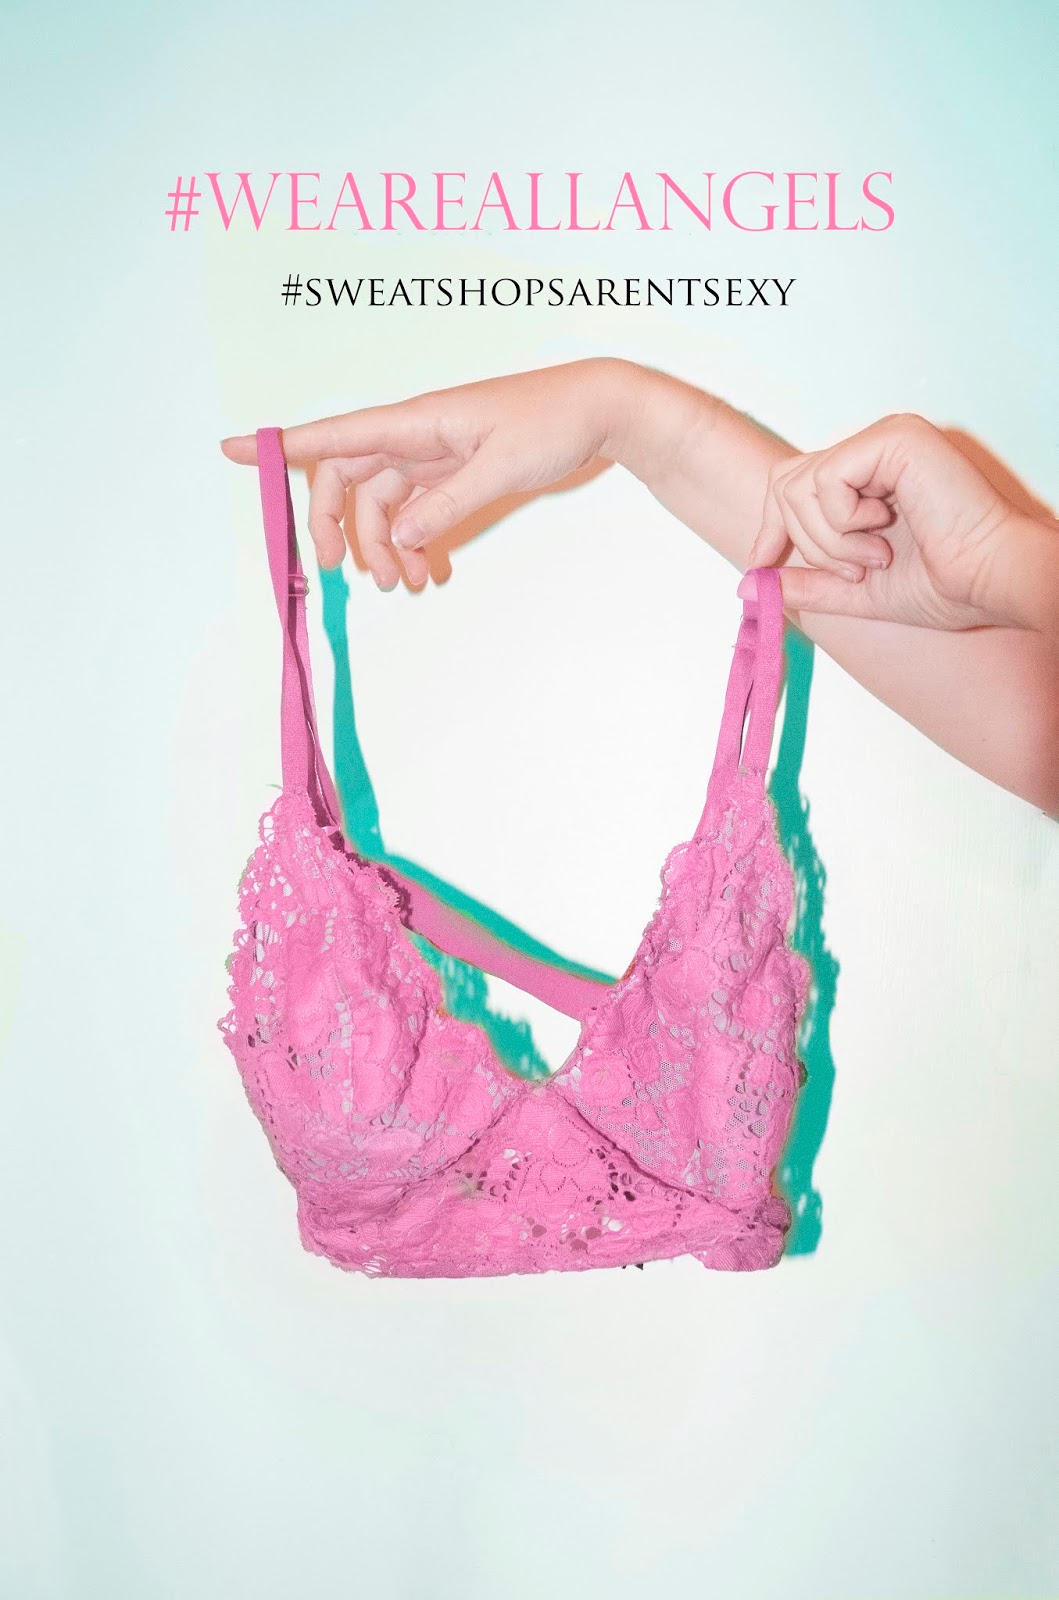 4 Reasons Why You Should Never Buy Victoria's Secret Bras – Bra